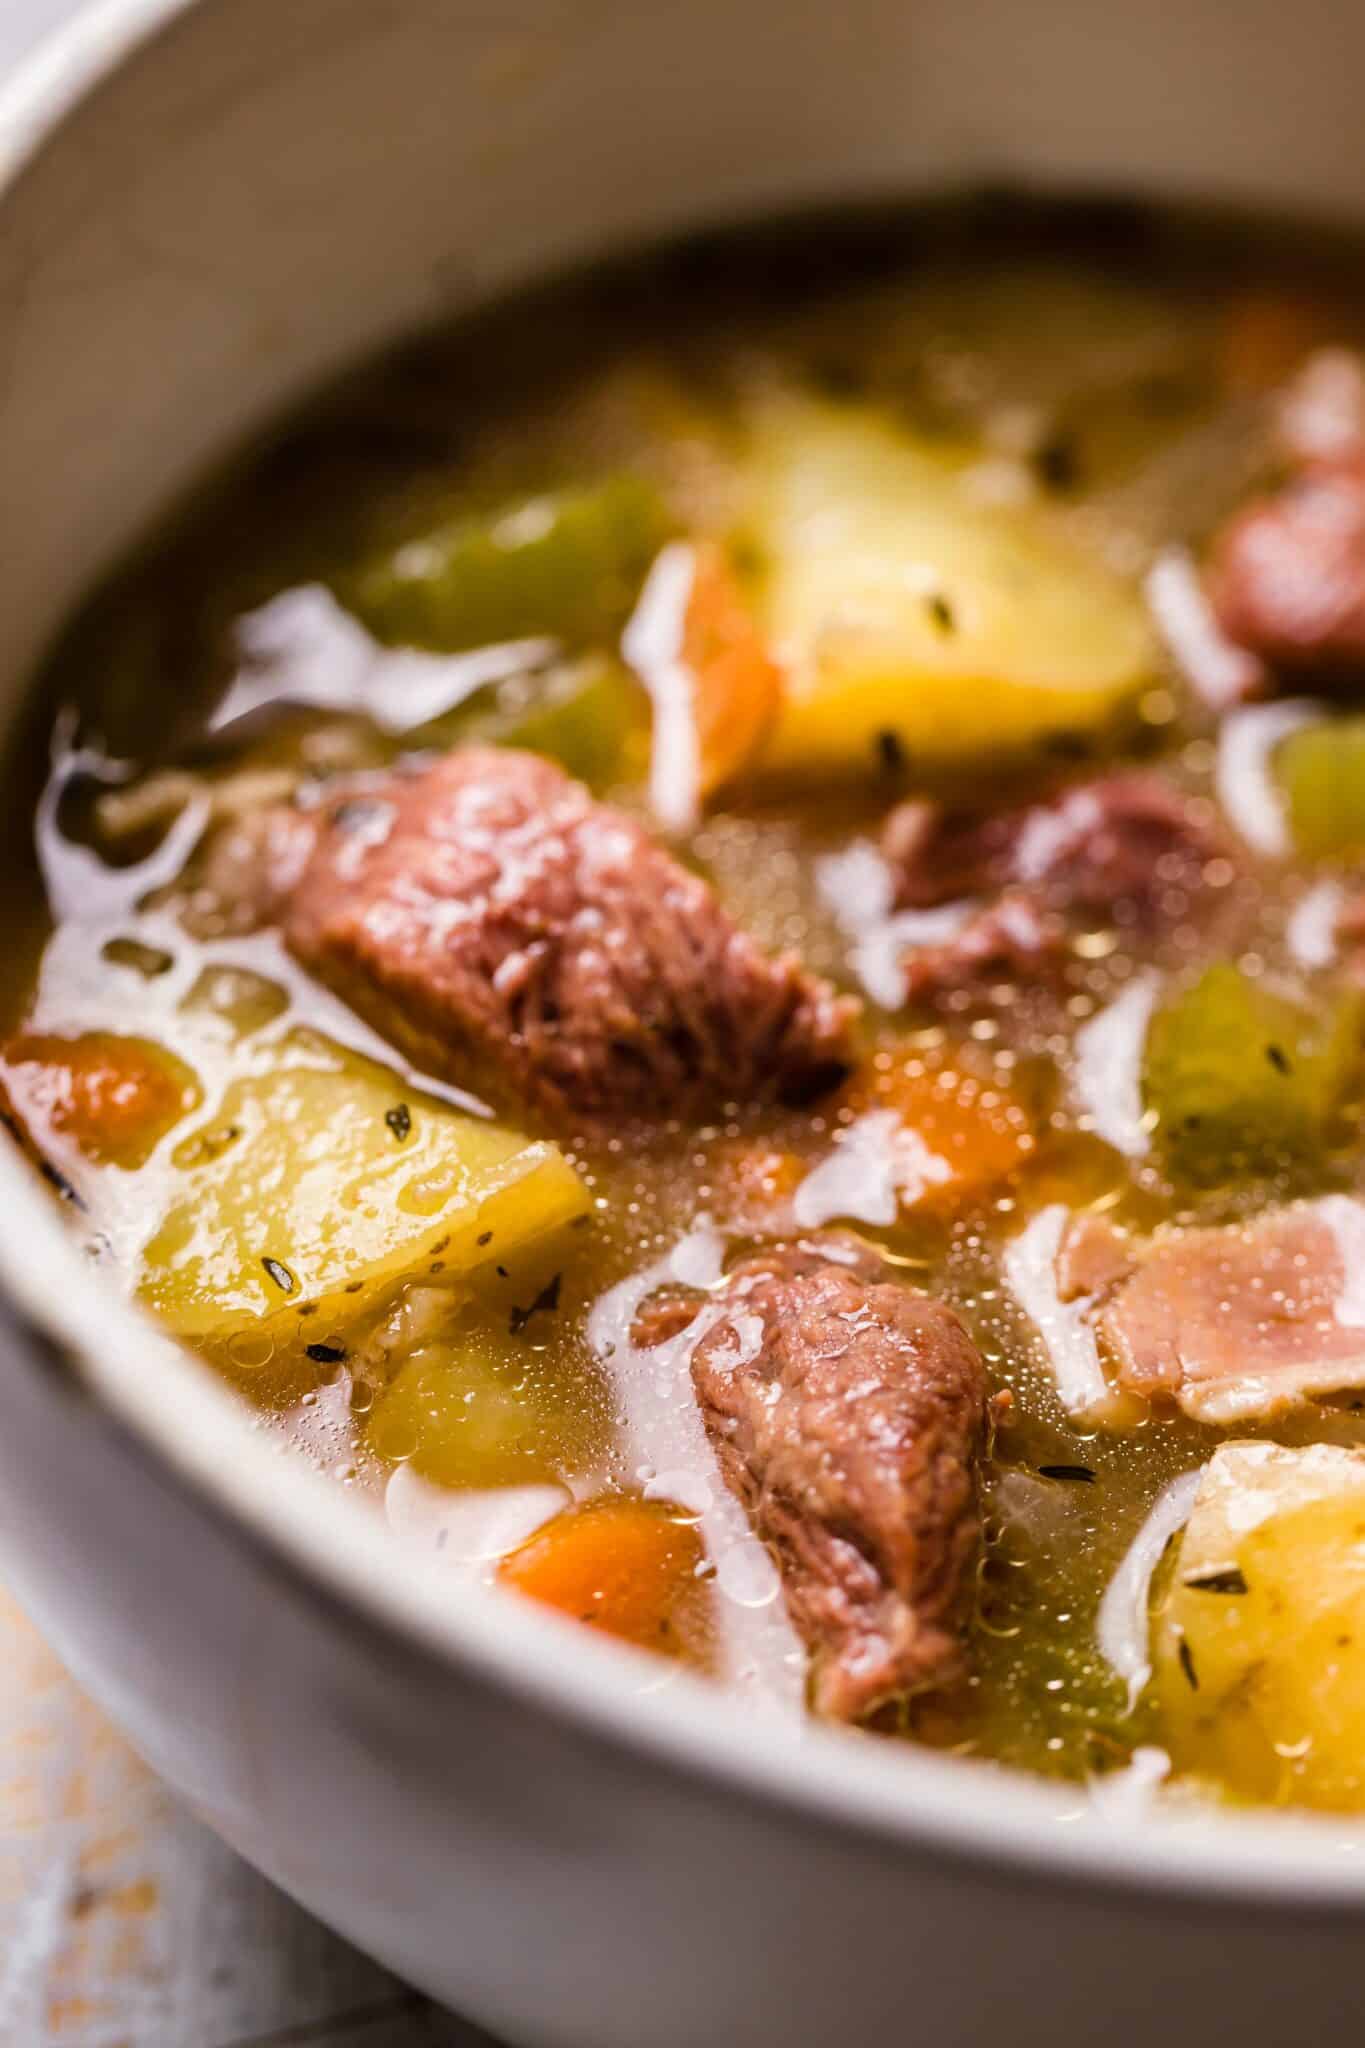 Up close photo of Irish Lamb Stew in a bowl with potatoes and vegetables.